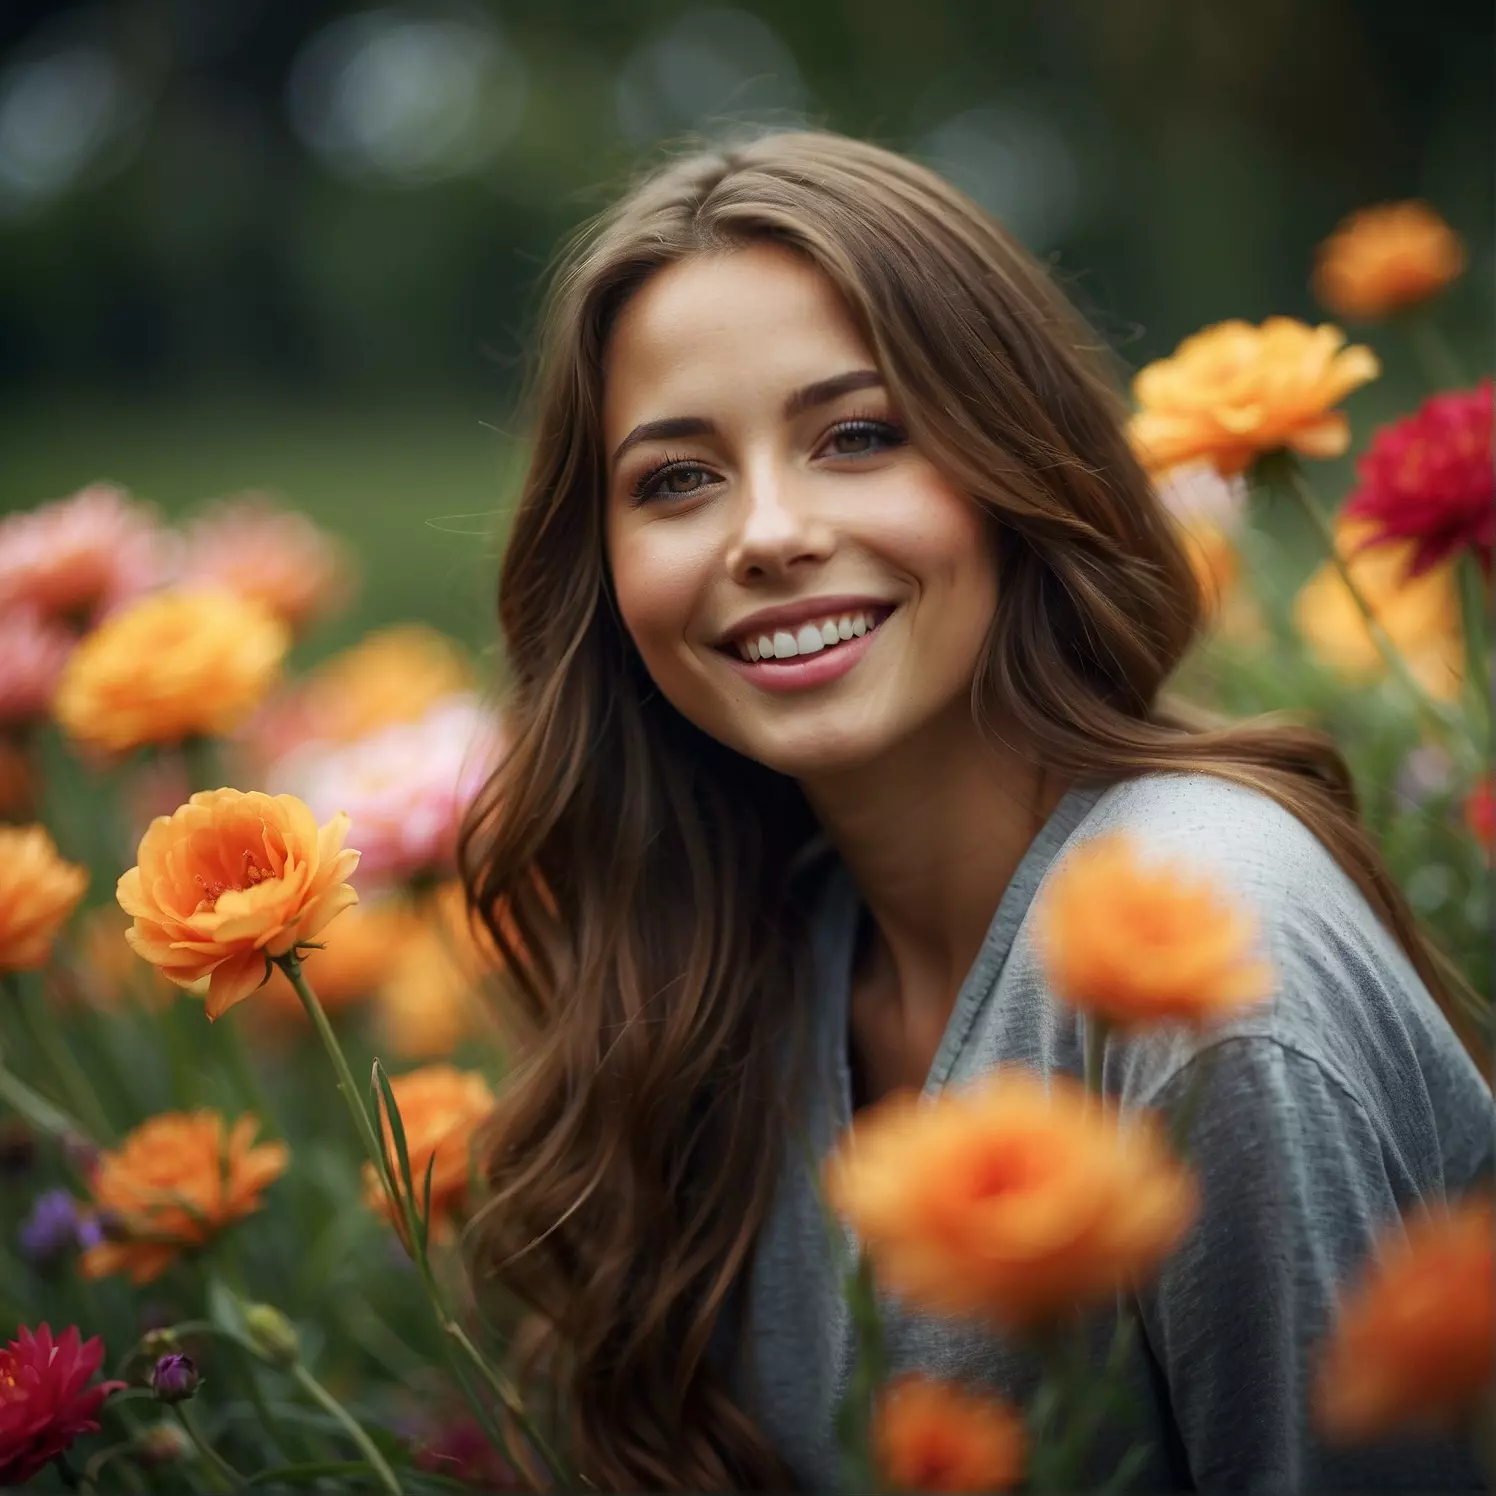 Woman smiling in floral